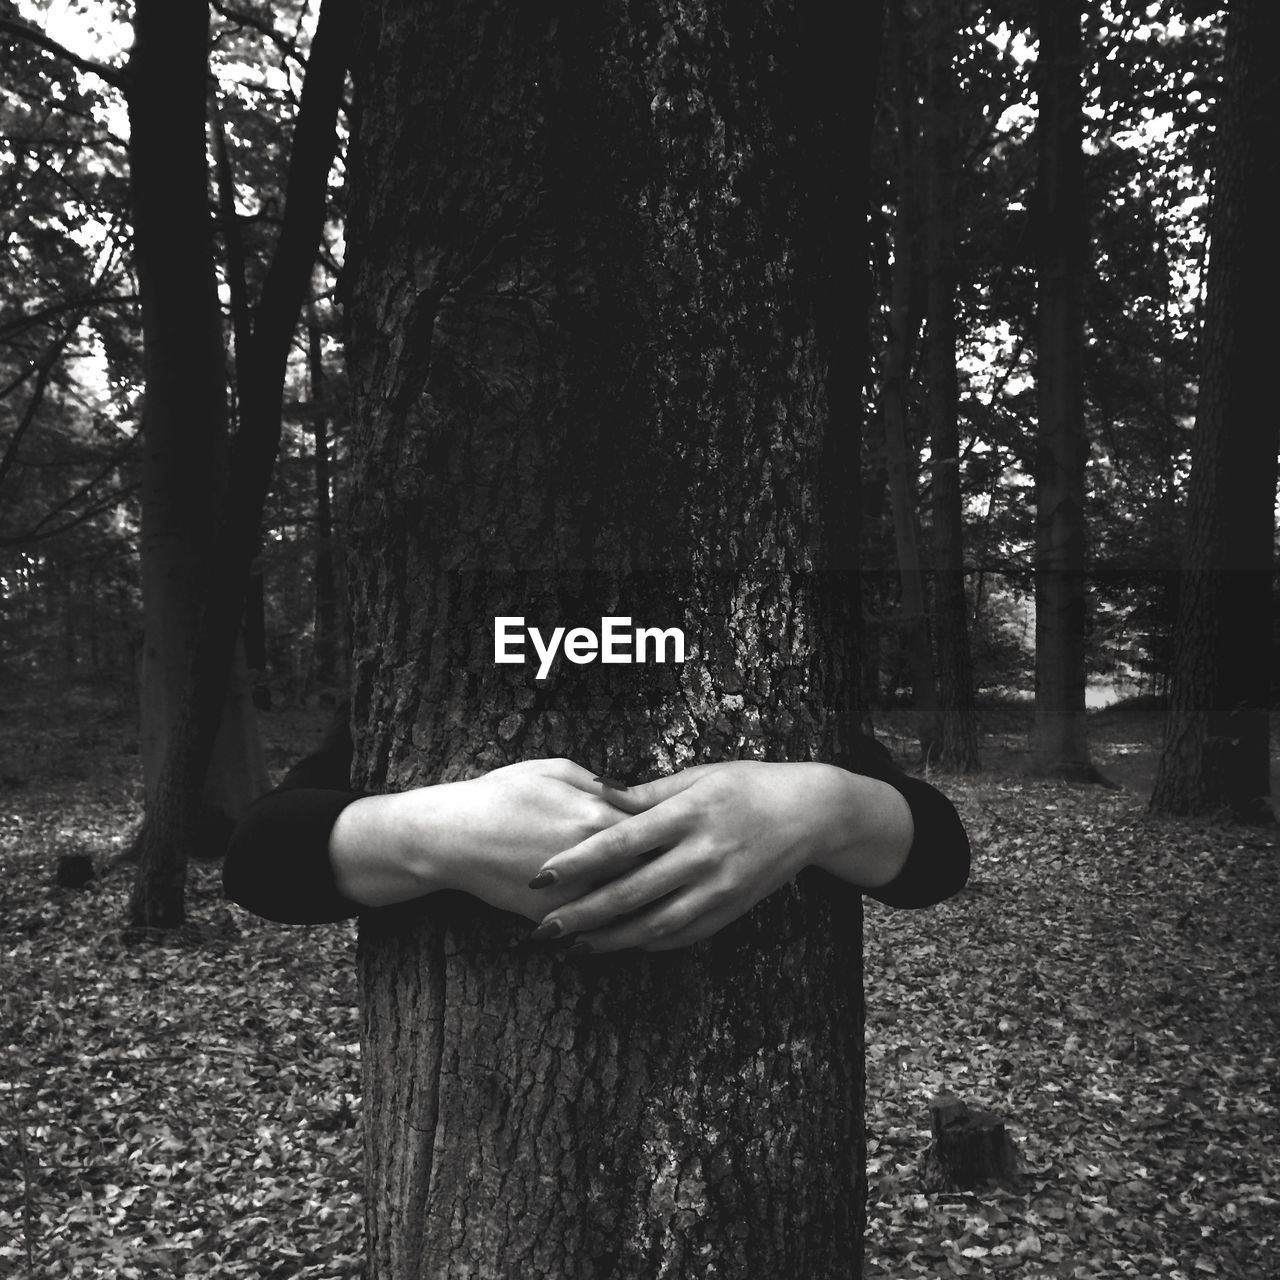 View of hands hugging tree in forest